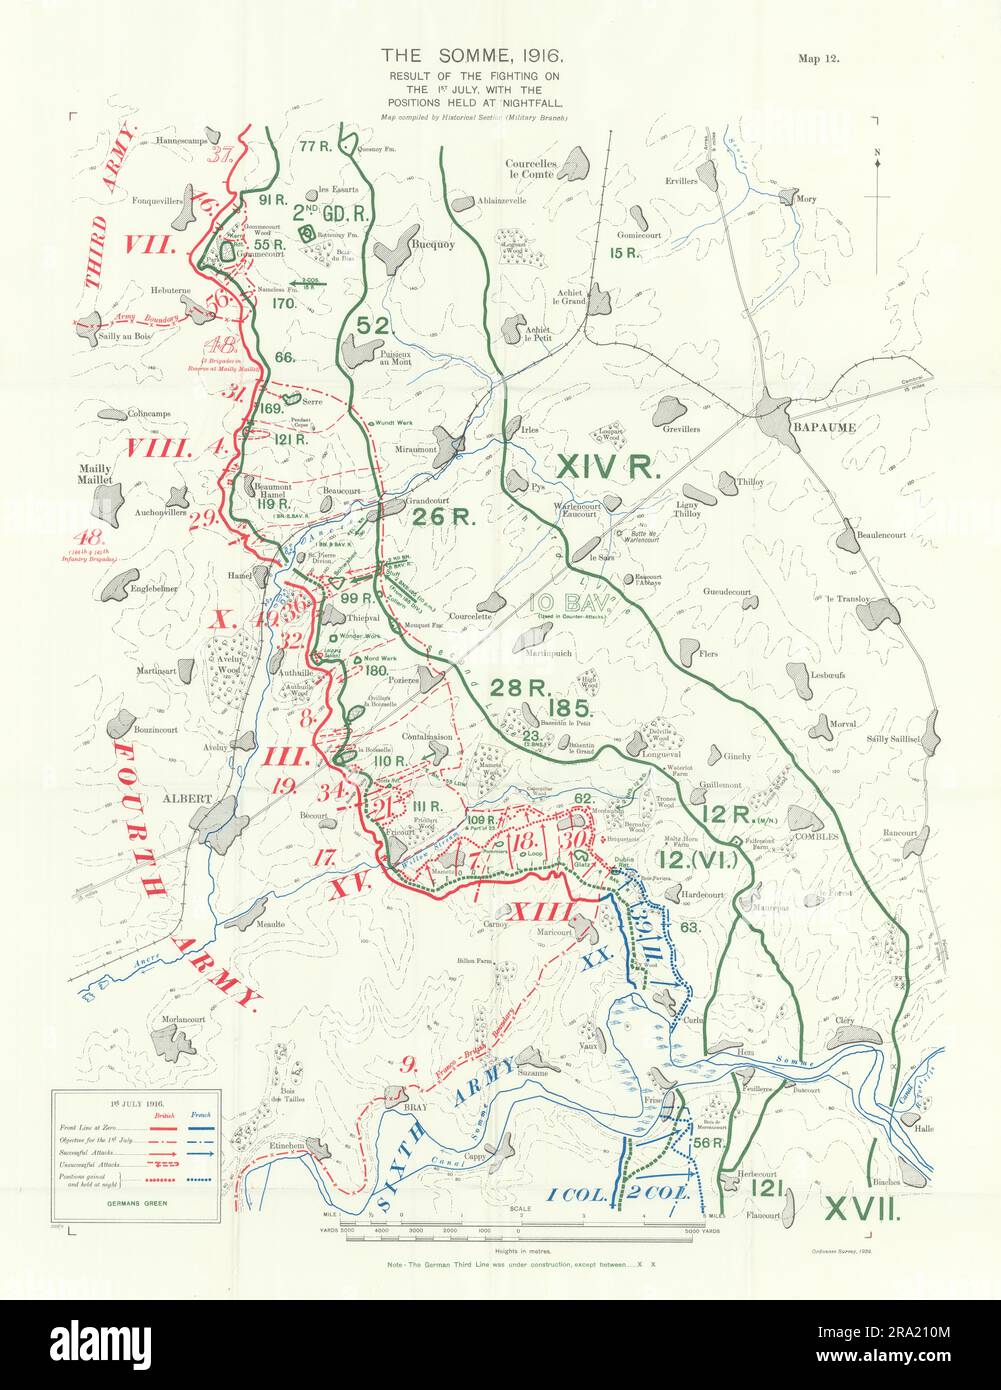 Somme, 1st July 1916. Positions at nightfall. WW1. Trenches 1932 old map Stock Photo